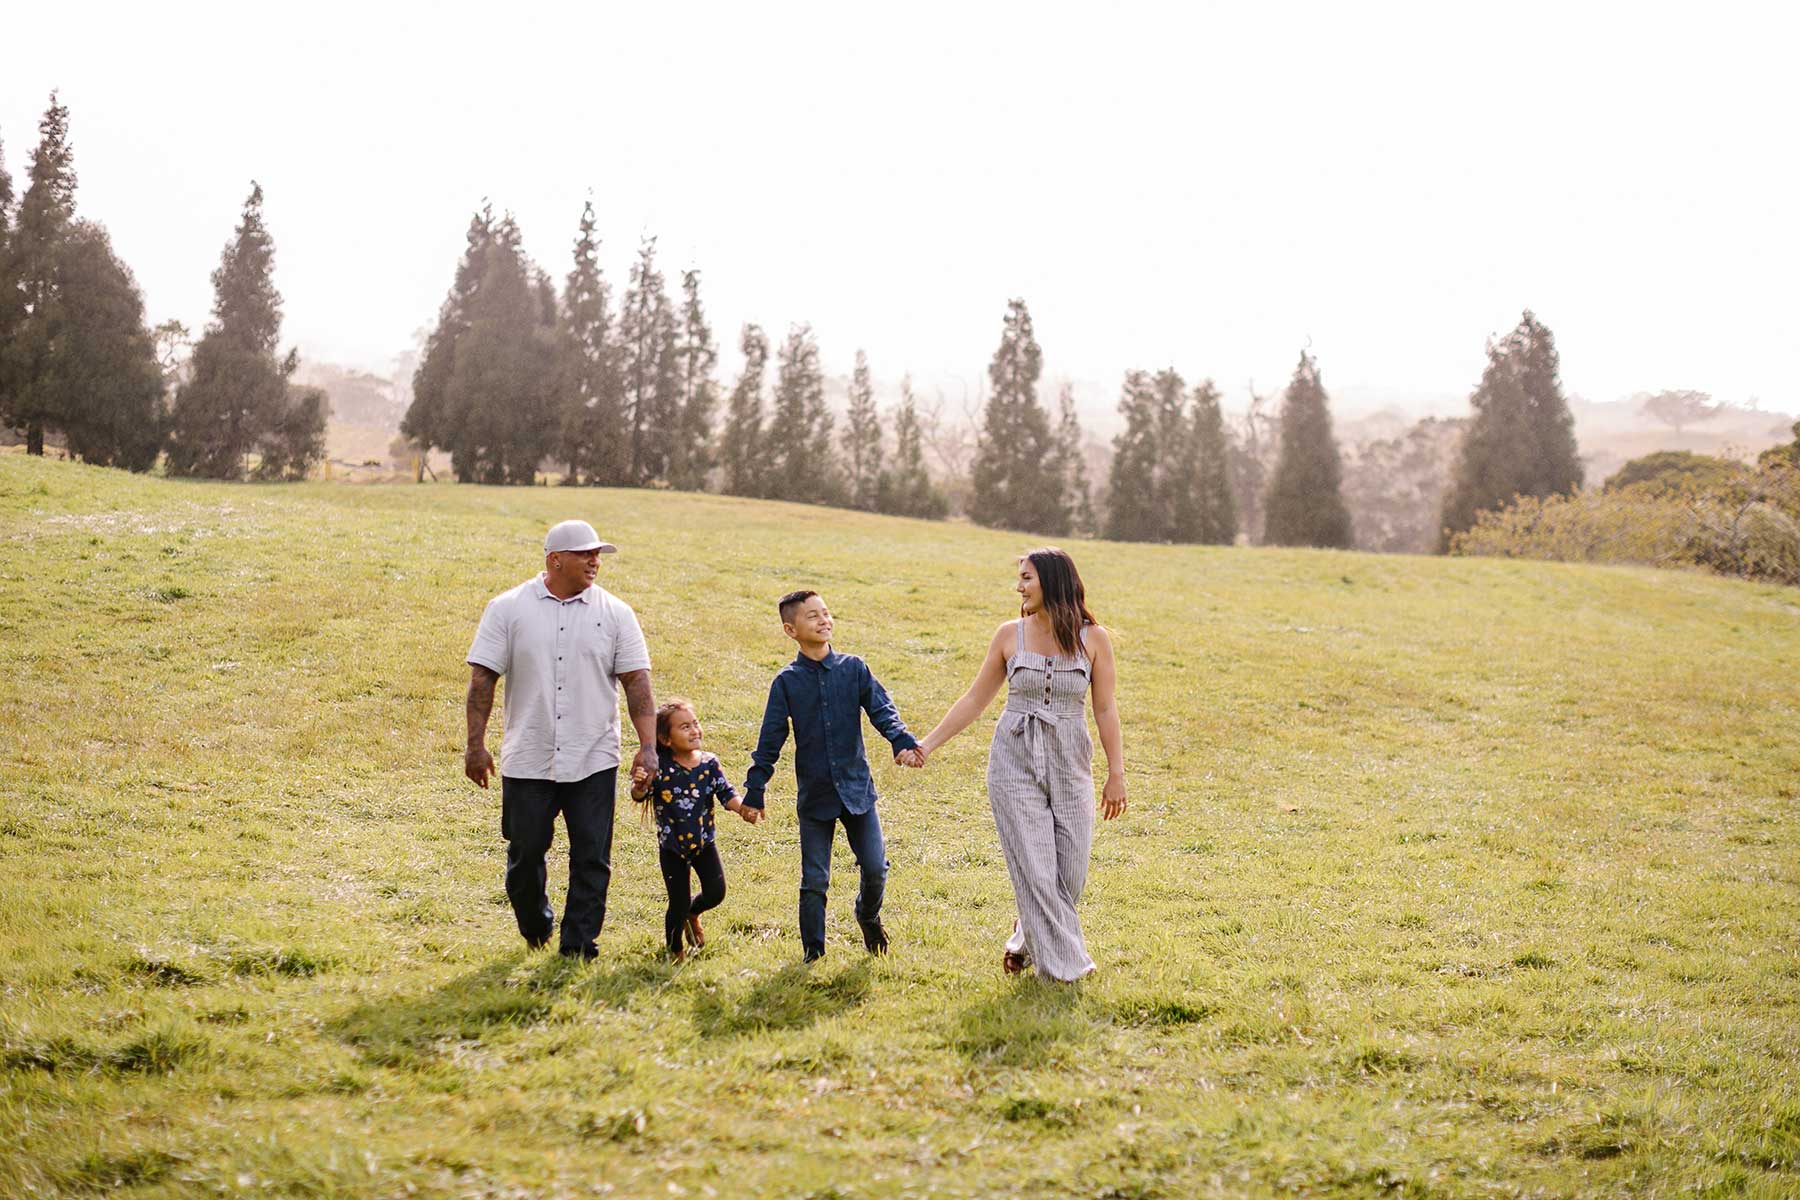 image of familyof 4 walking together in a meadow.